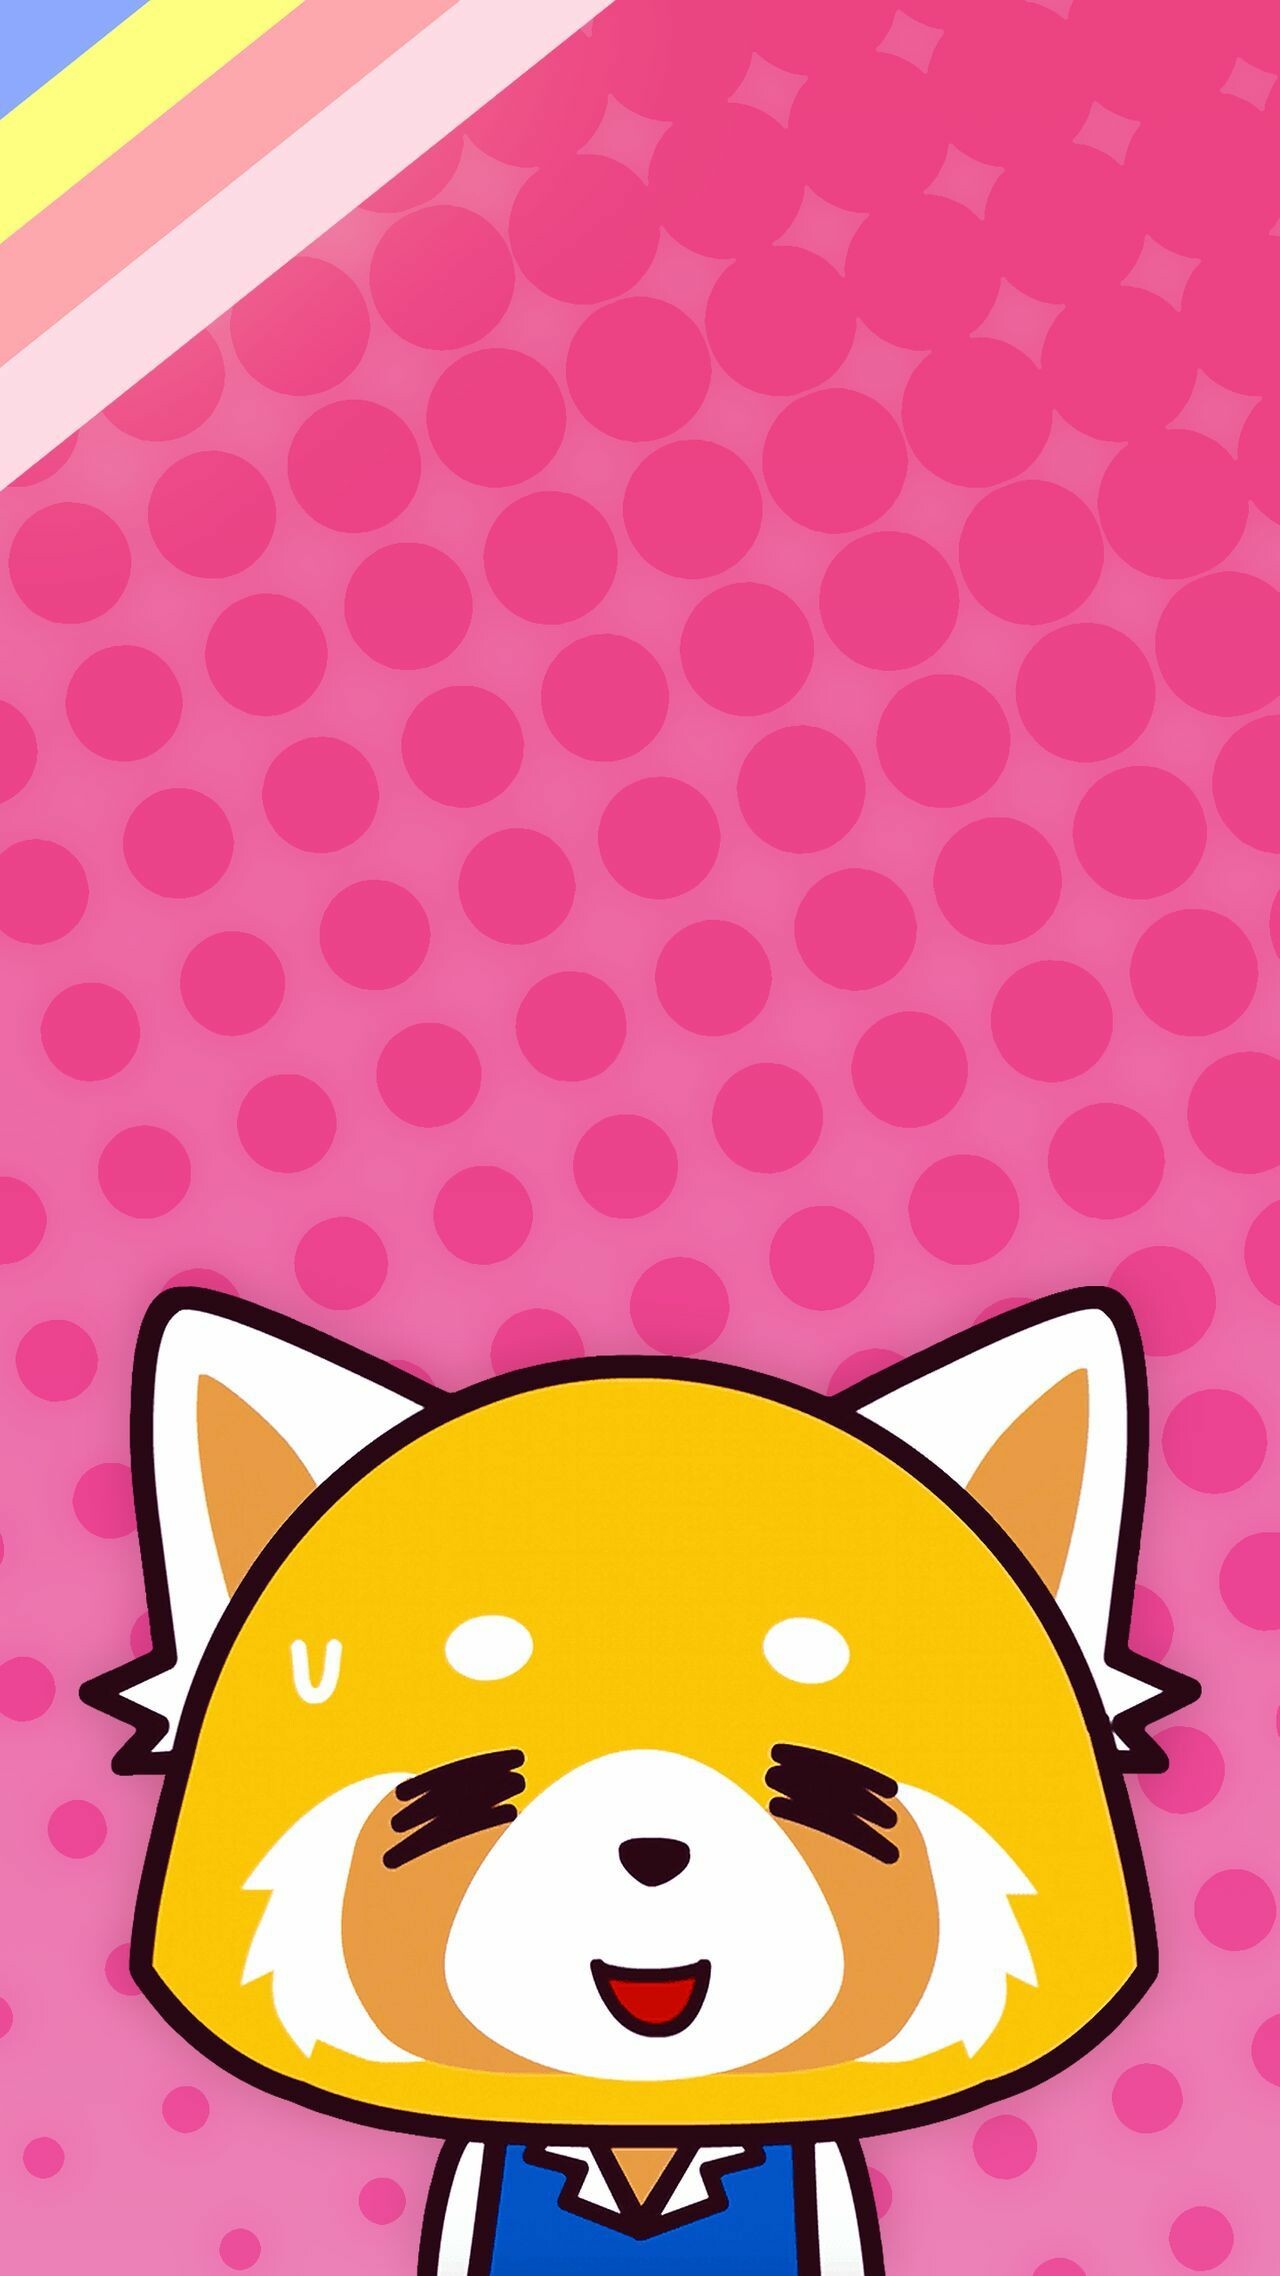 Aggretsuko: A 25-year-old and single anthropomorphic red panda, working in the accounting department. 1280x2280 HD Wallpaper.